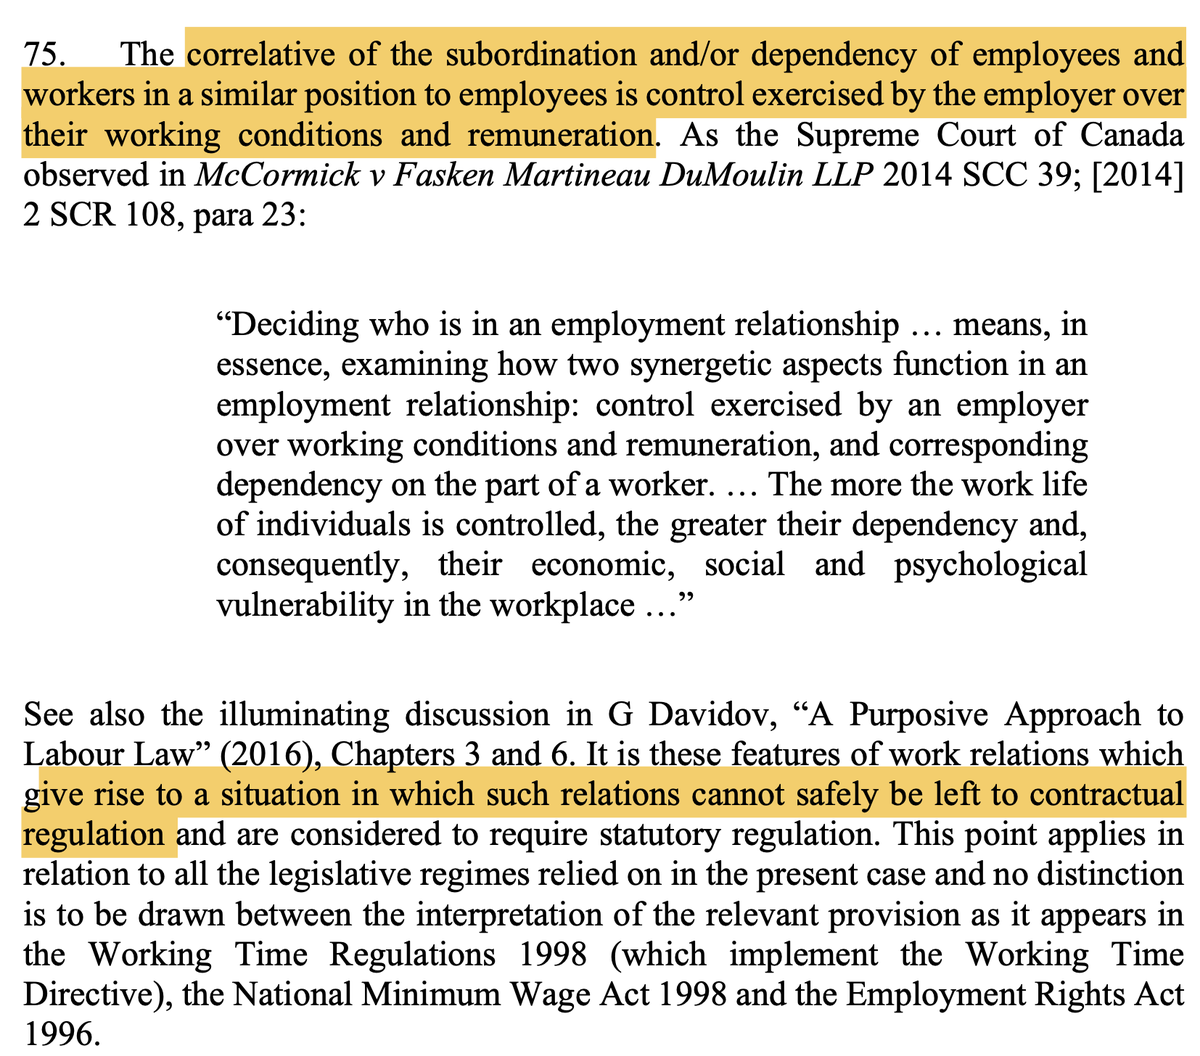 Employers’ control and worker’s dependence ‘give rise to a situation in which [employment] relations cannot safely be left to contractual regulation’ (see also a nice shoutout to  @DavidovGuy's excellent book!)